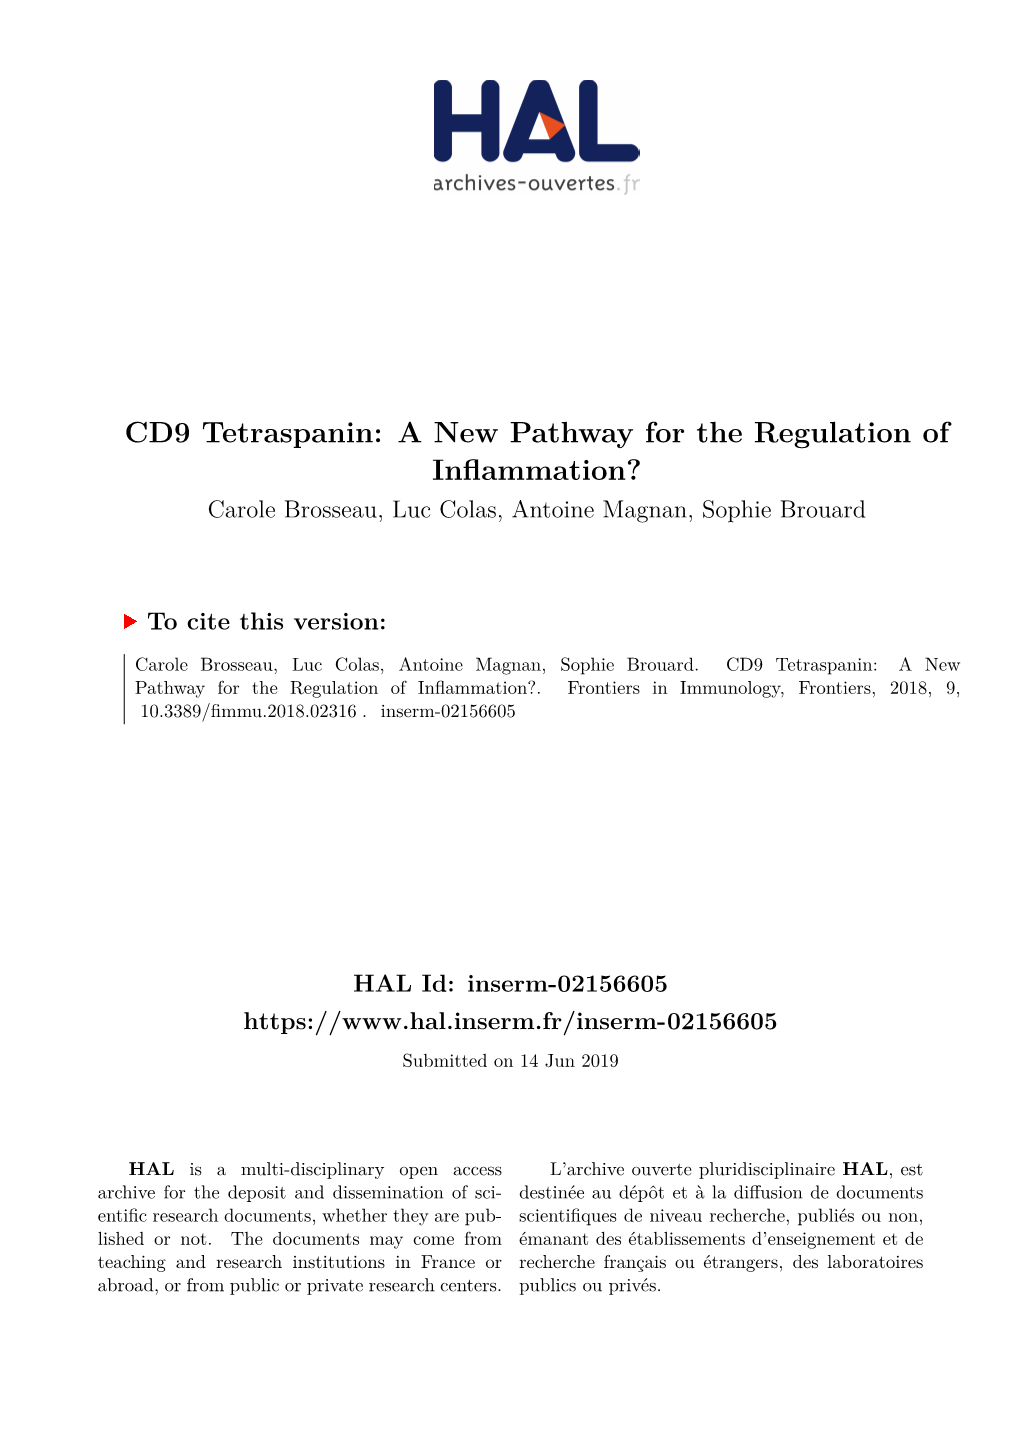 CD9 Tetraspanin: a New Pathway for the Regulation of Inflammation? Carole Brosseau, Luc Colas, Antoine Magnan, Sophie Brouard